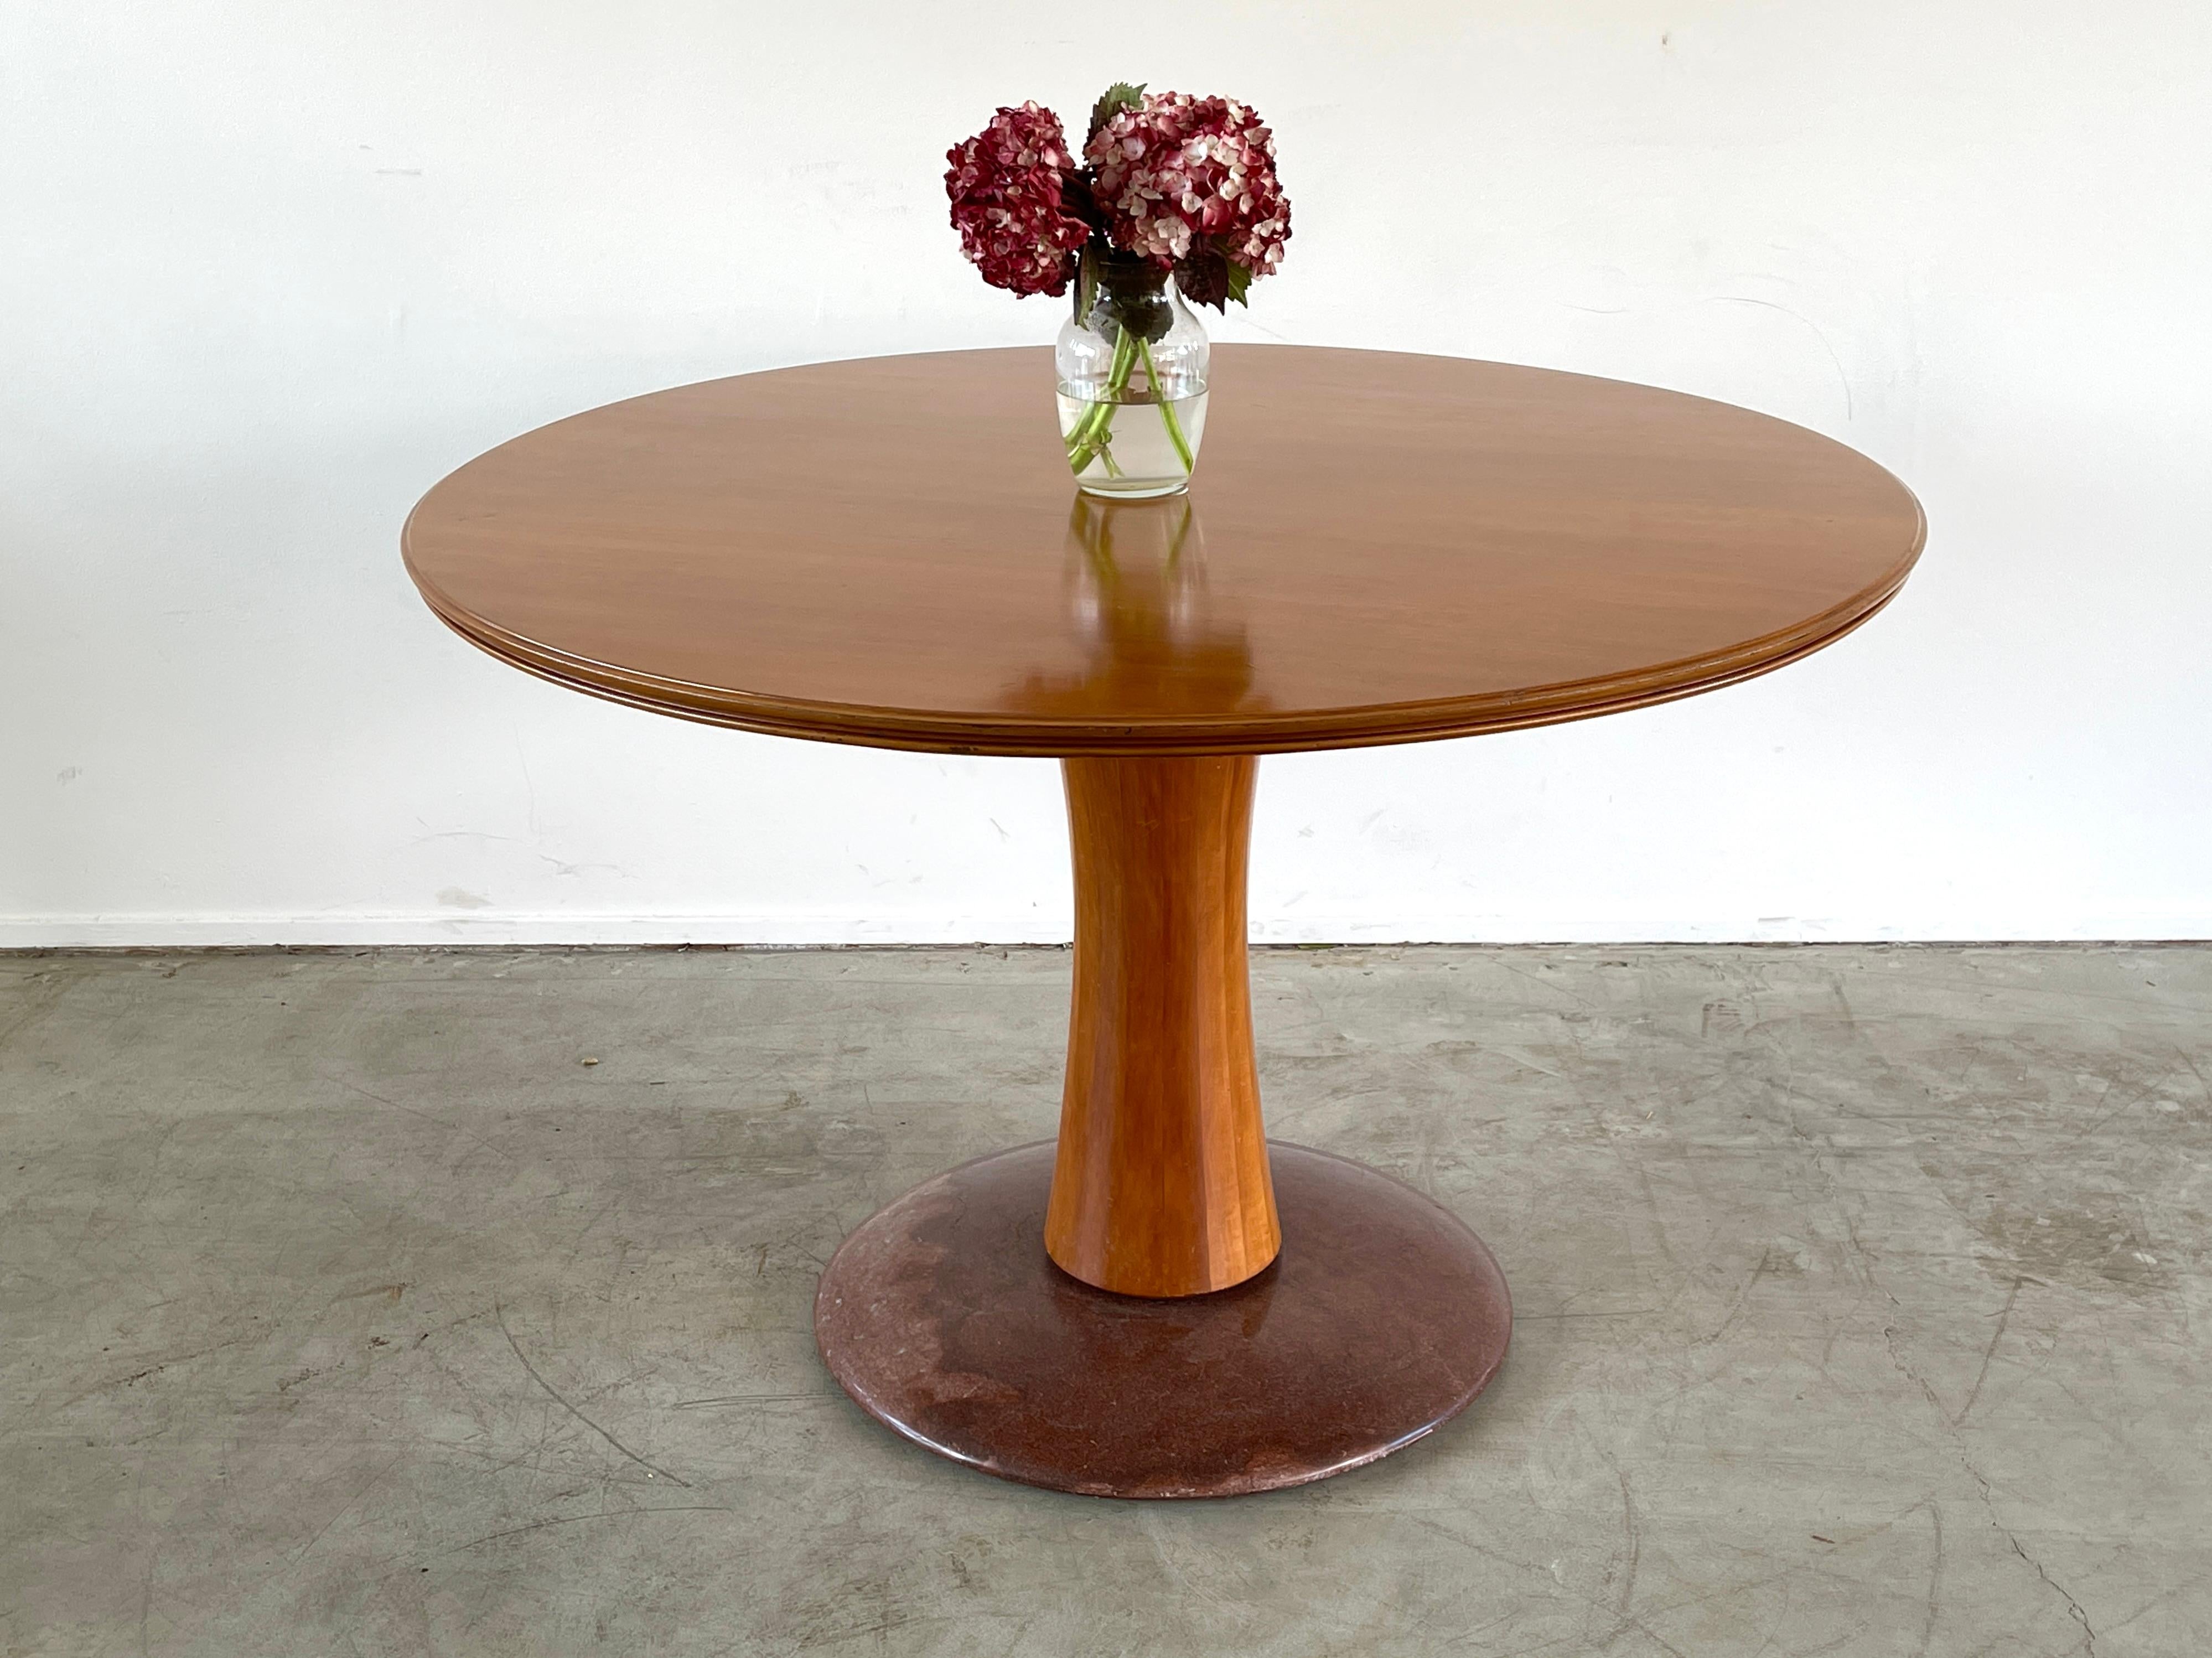 Beautiful center attributed to Paolo Buffa
Cherry wood top and faceted wood pedestal sitting on marble base.